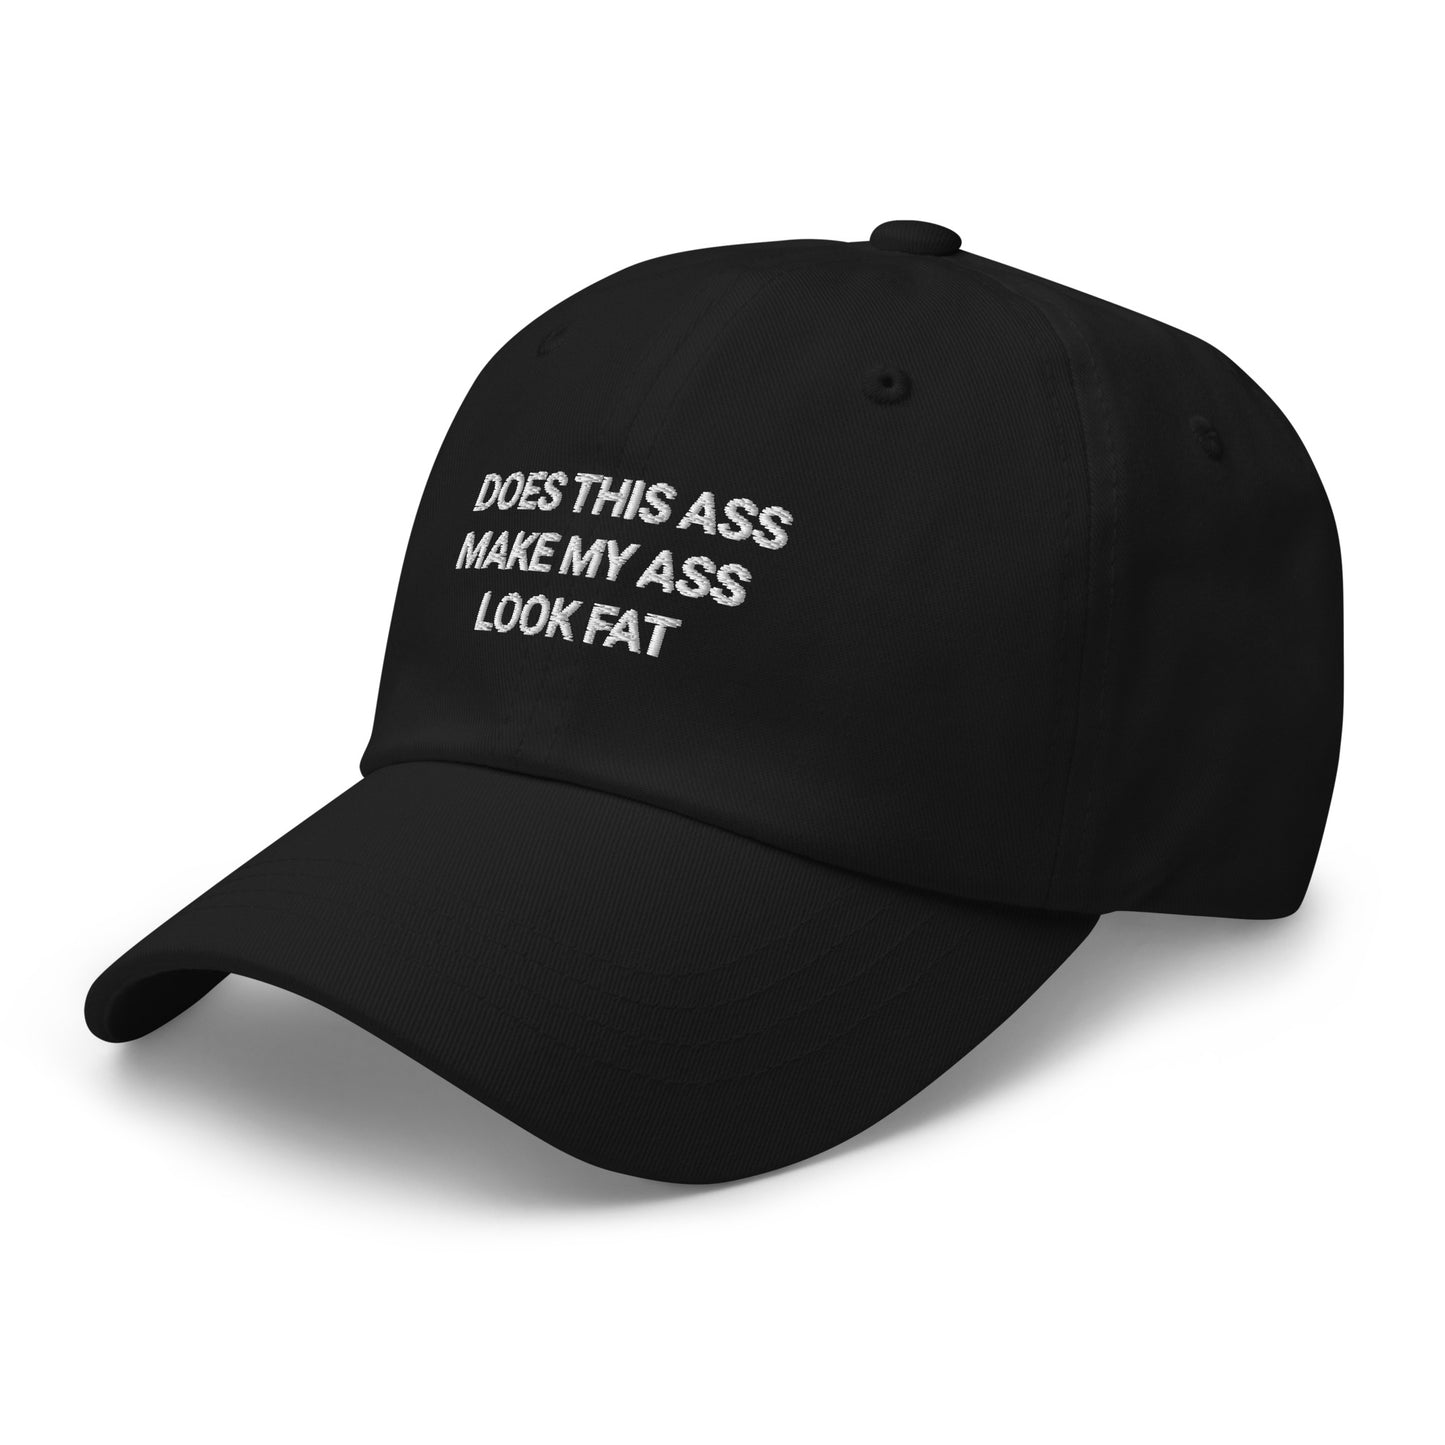 Does This Ass Make My Ass Look Fat Hat.